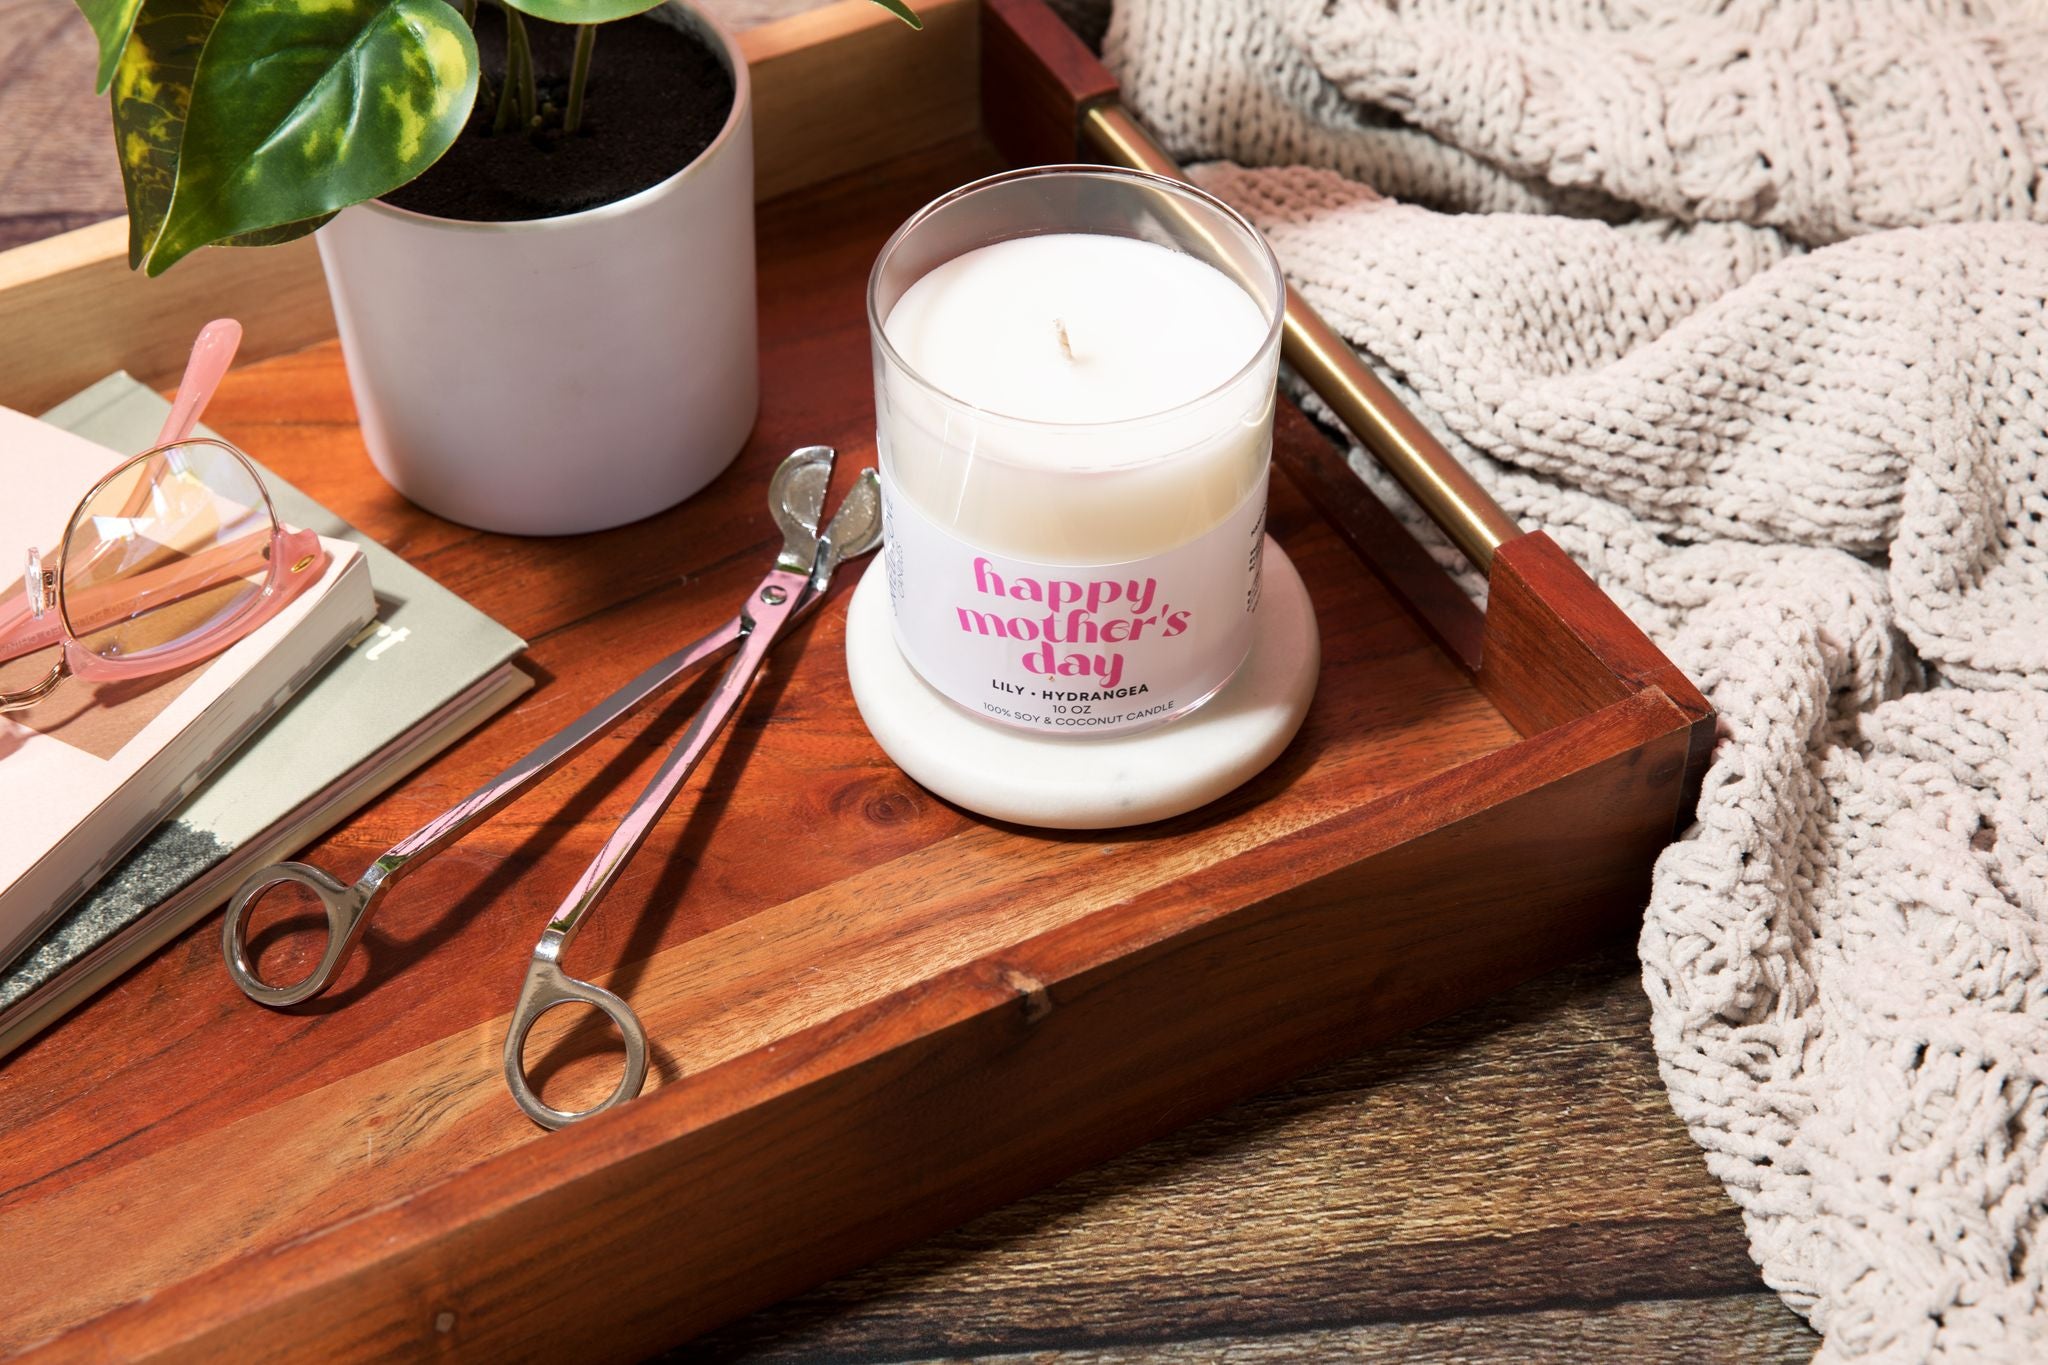 Exploring Candle Accessories: Must-Have Tools for Every Candle Enthusiast